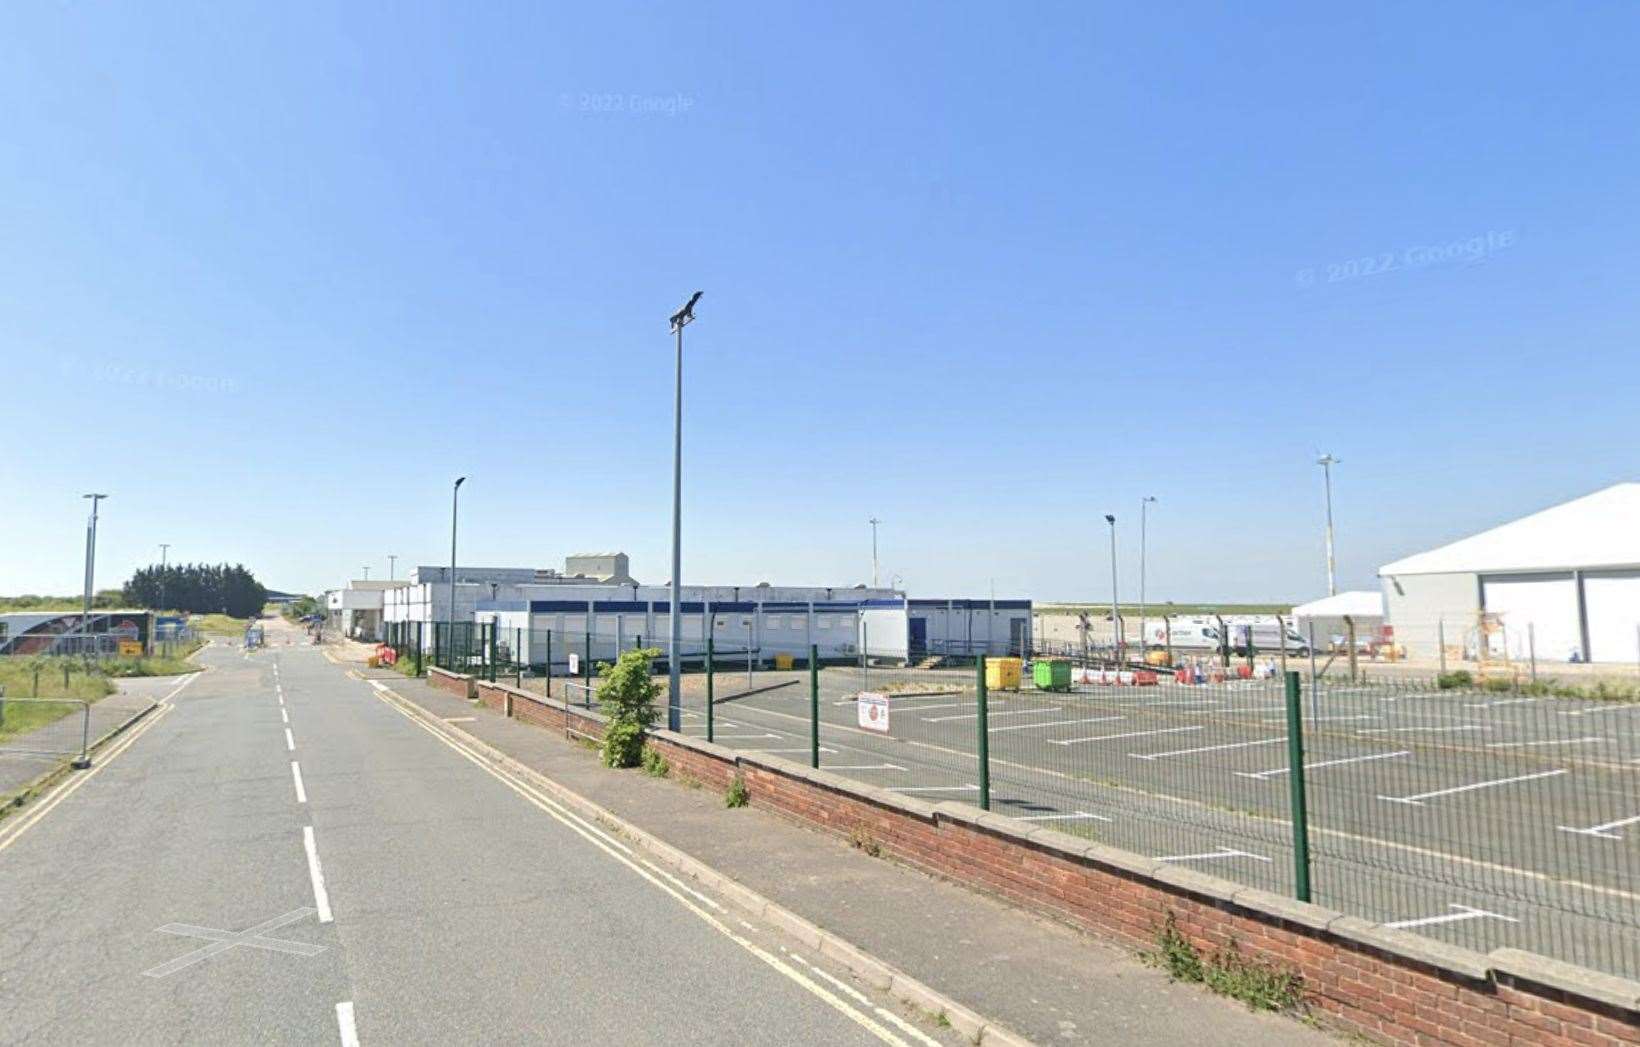 Manston airport has been shut for nearly 10 years. Picture: Google